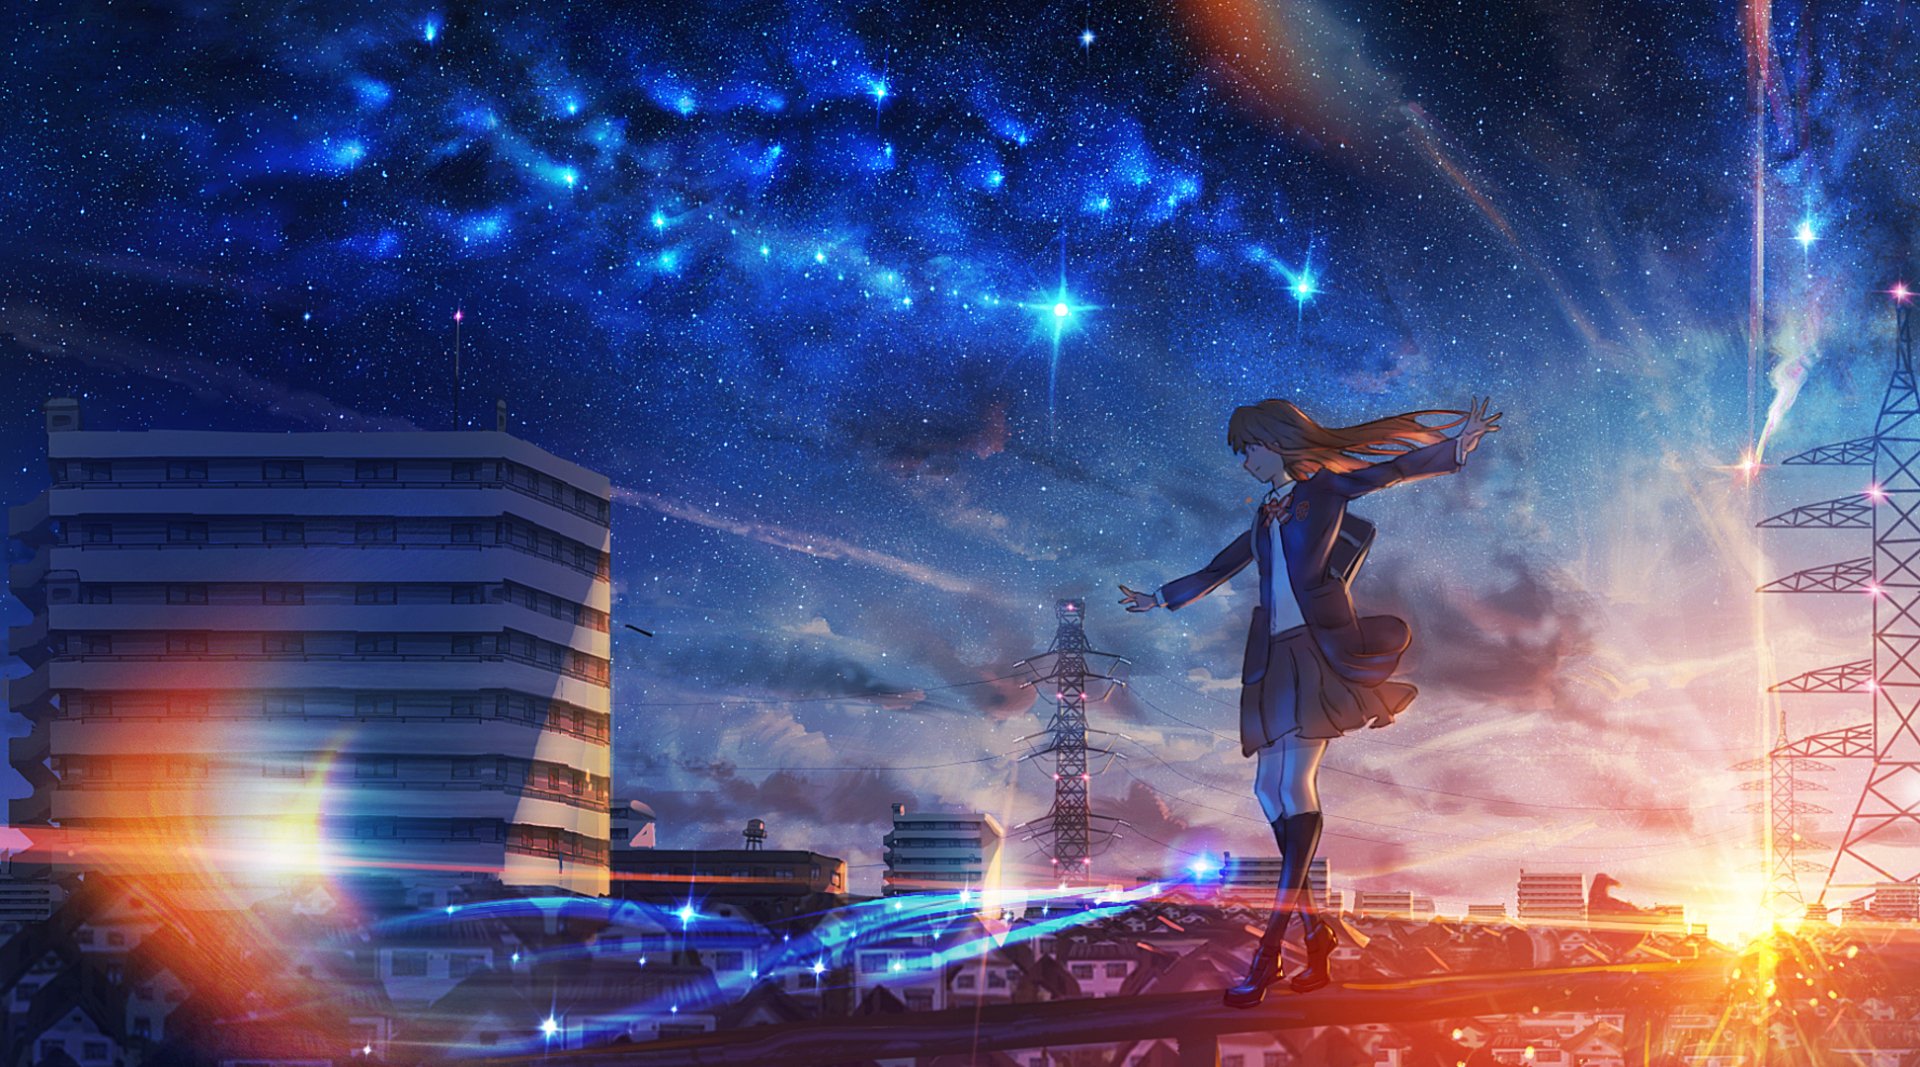 Download Starry Sky Sunset City Anime Original HD Wallpaper by ナコモ